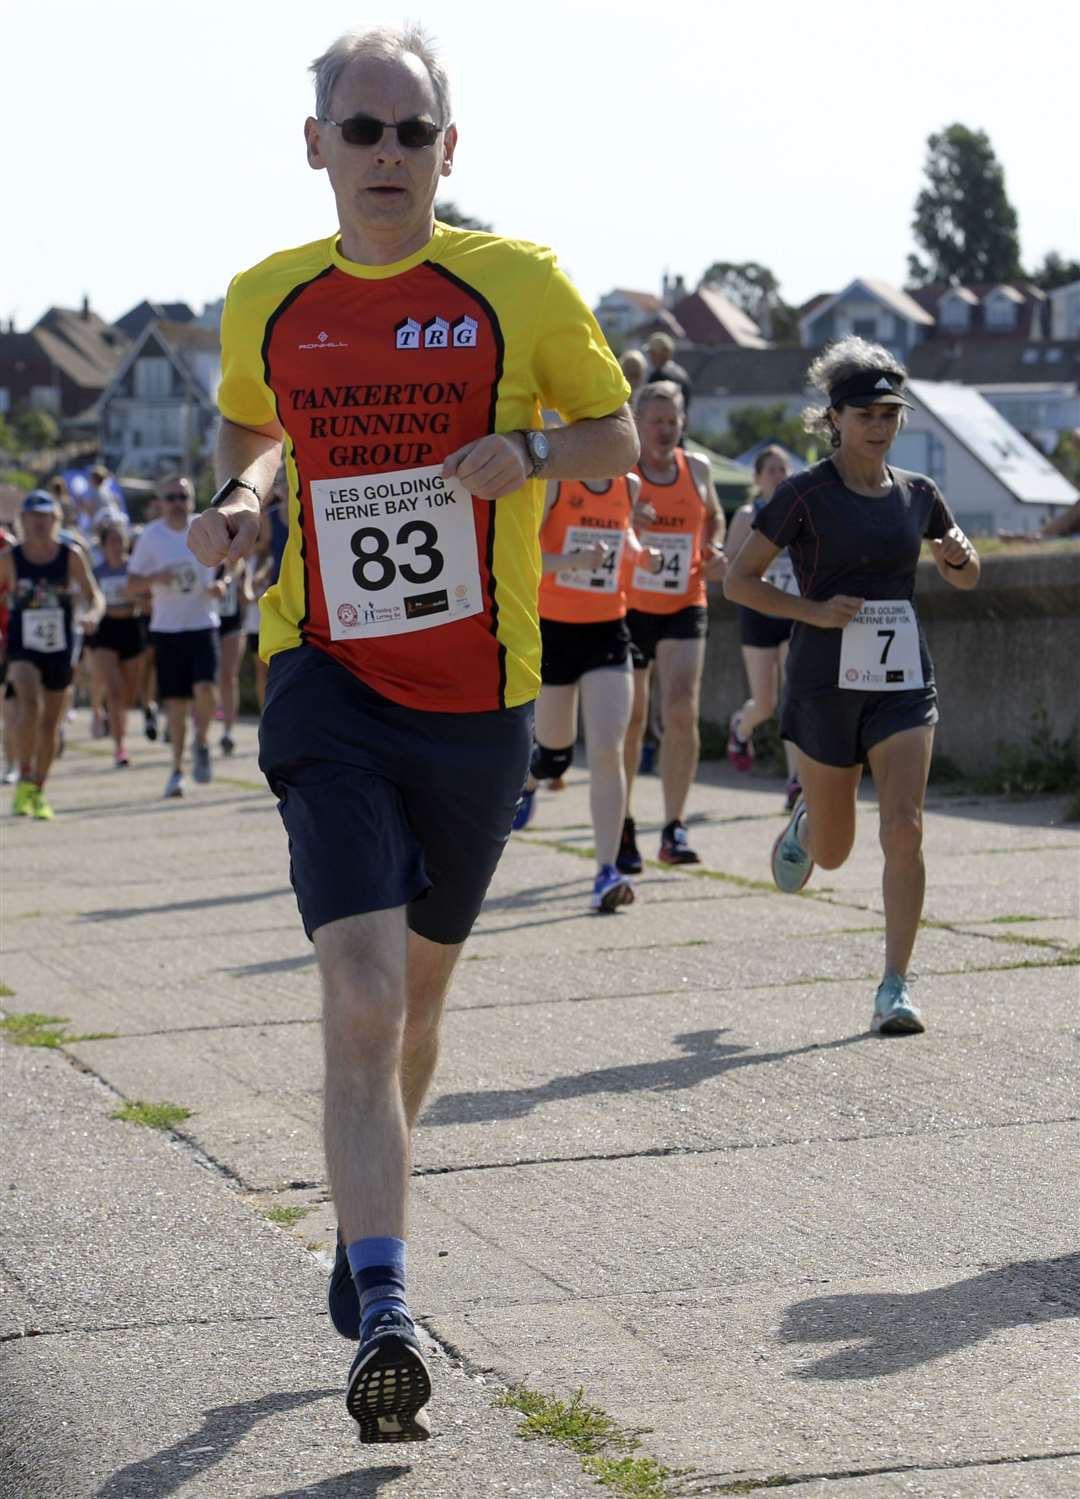 No. 83 Dirk Froebrich of Tankerton Running Group. Picture: Barry Goodwin (58030990)